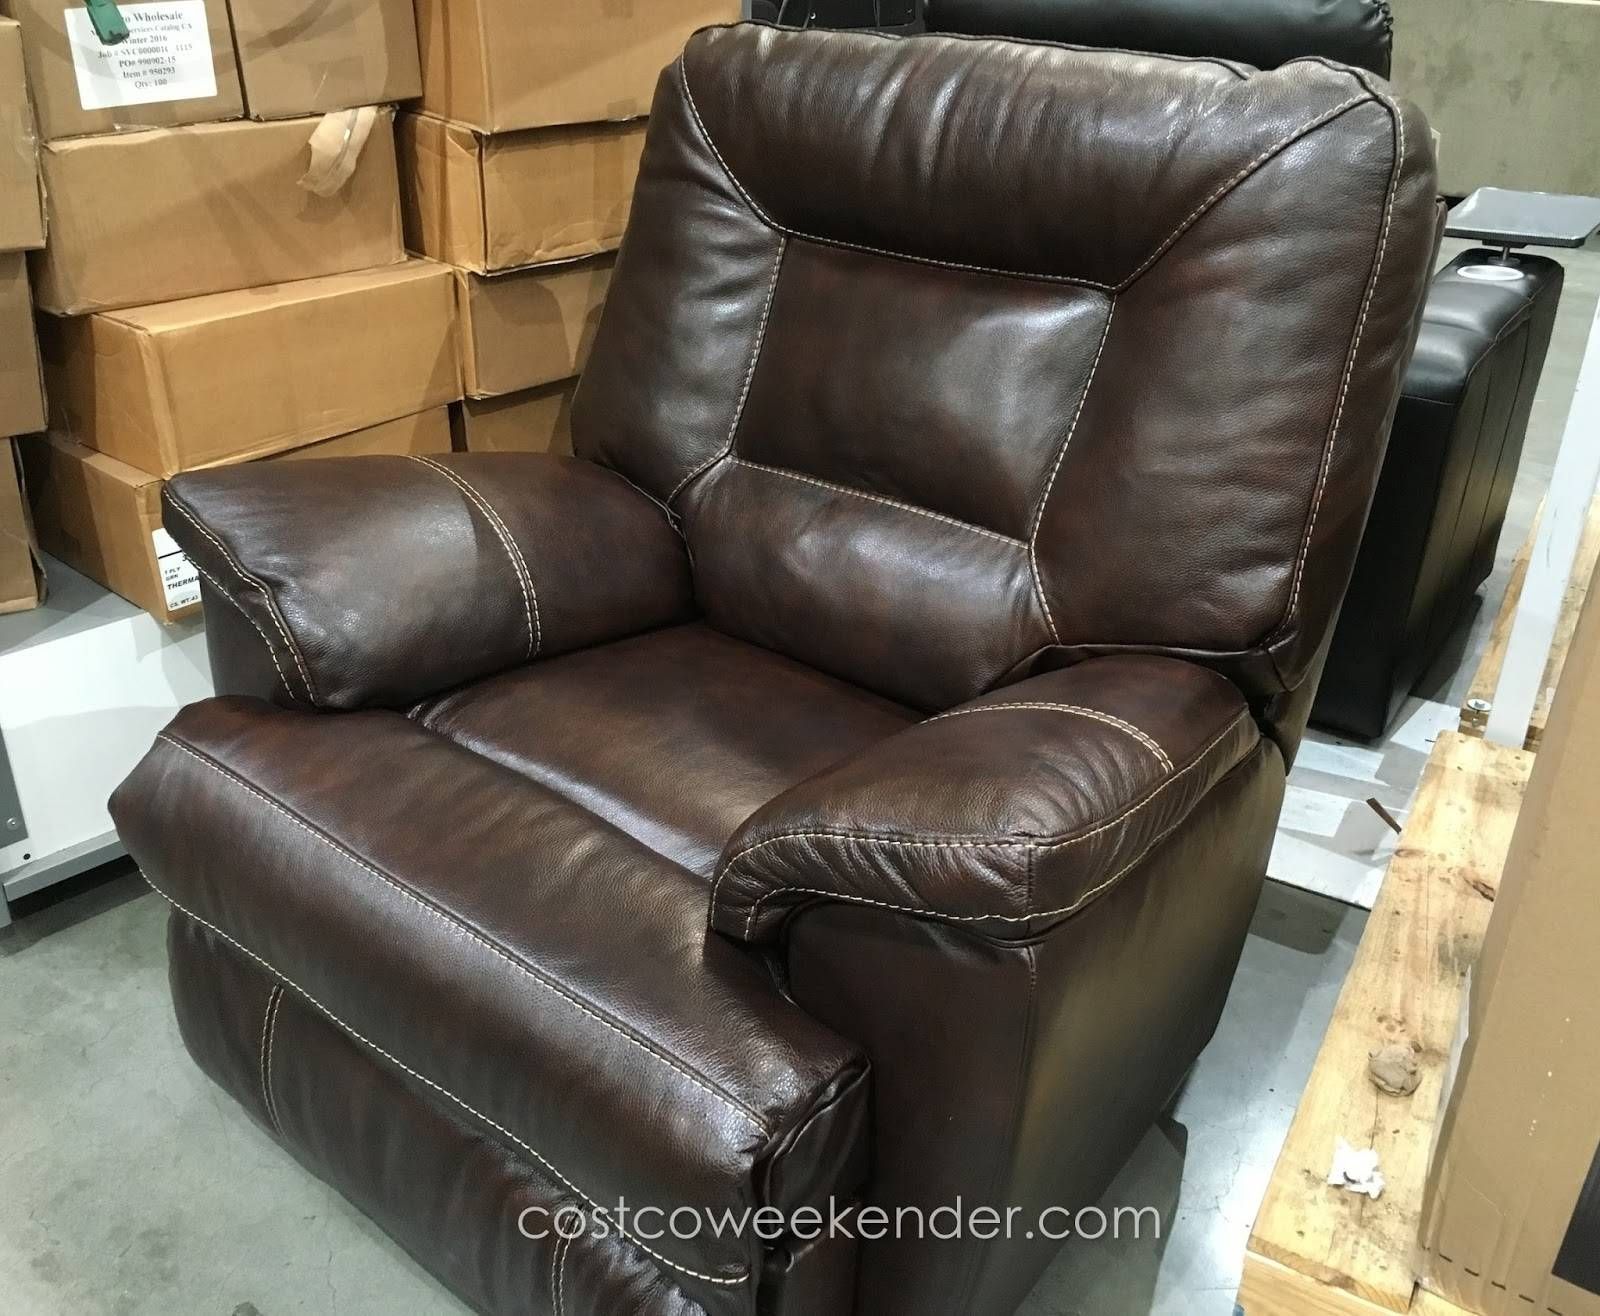 Furniture & Sofa: Enjoy Your Holiday With Costco Home Theater Pertaining To Berkline Couches (View 4 of 15)